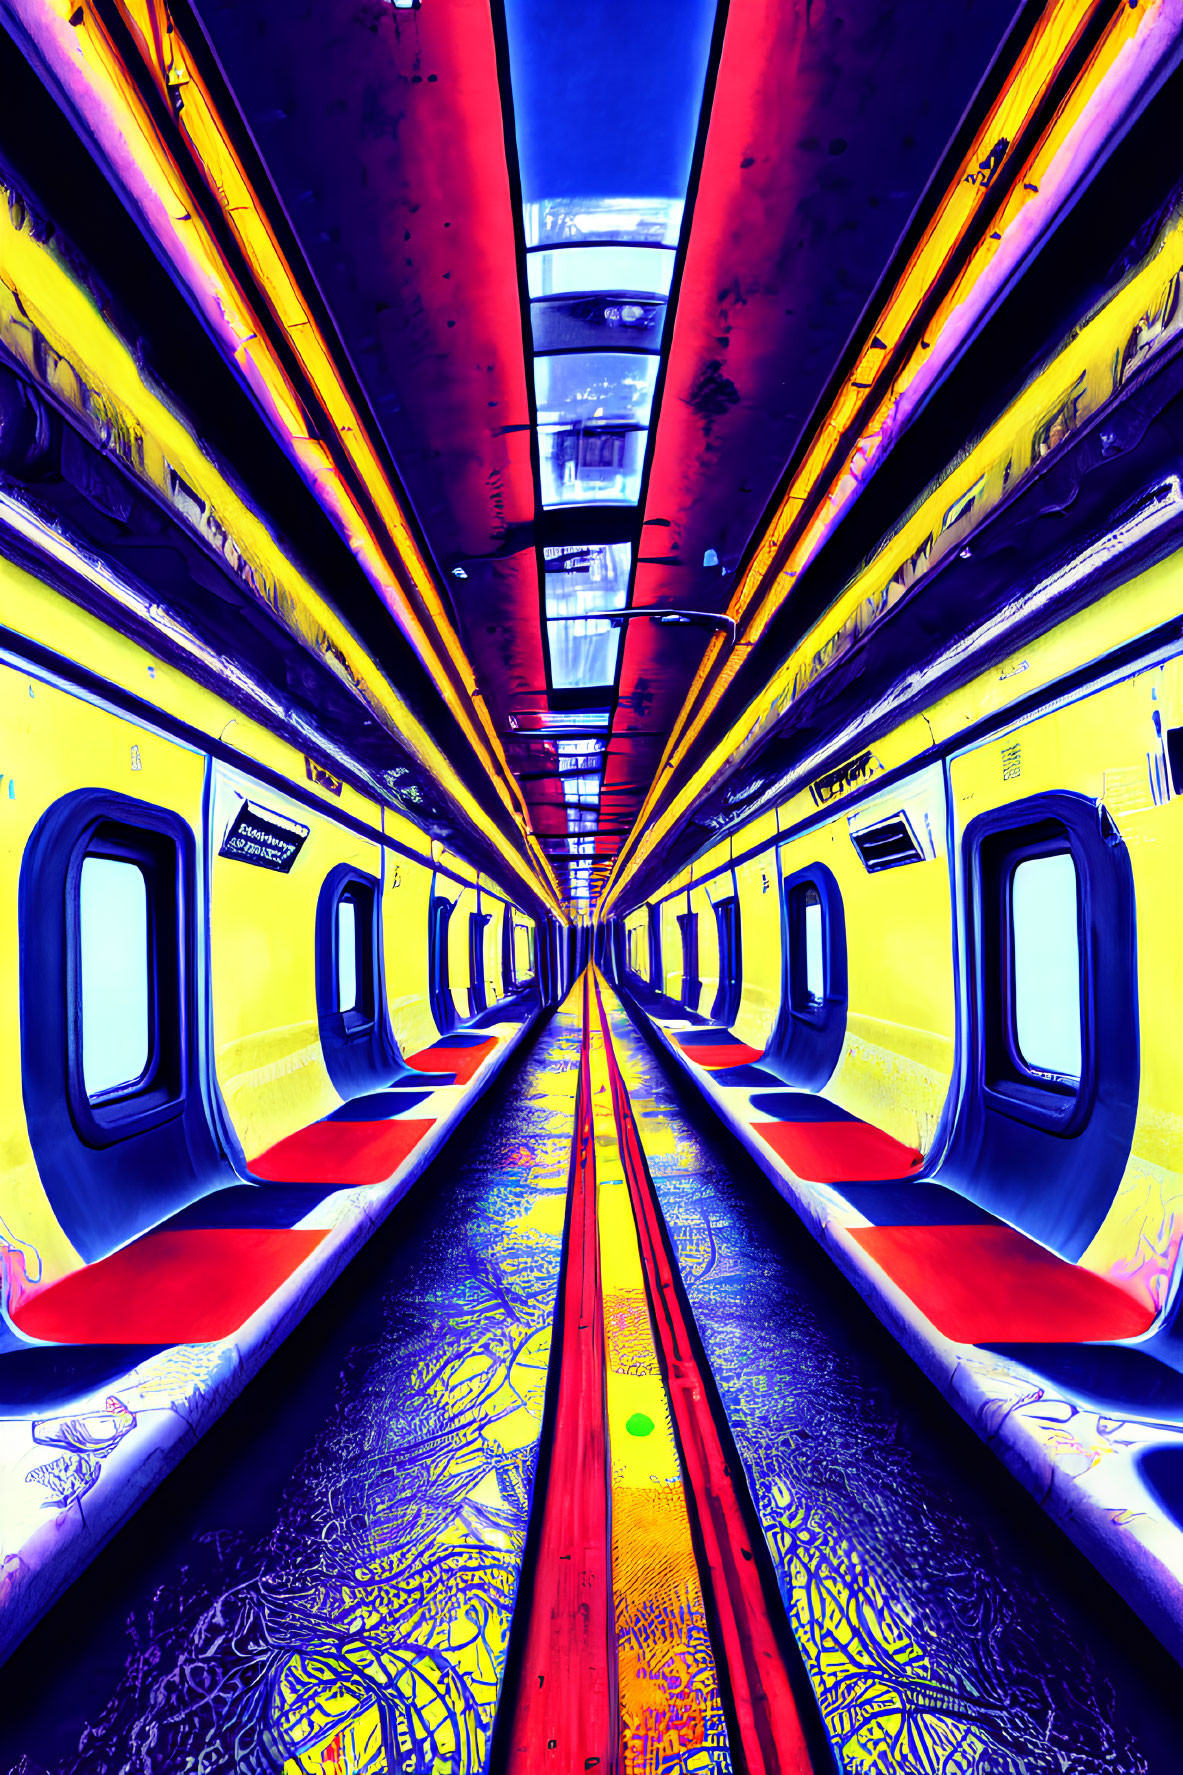 Colorful psychedelic train interior with dramatic perspective and abstract floor patterns.